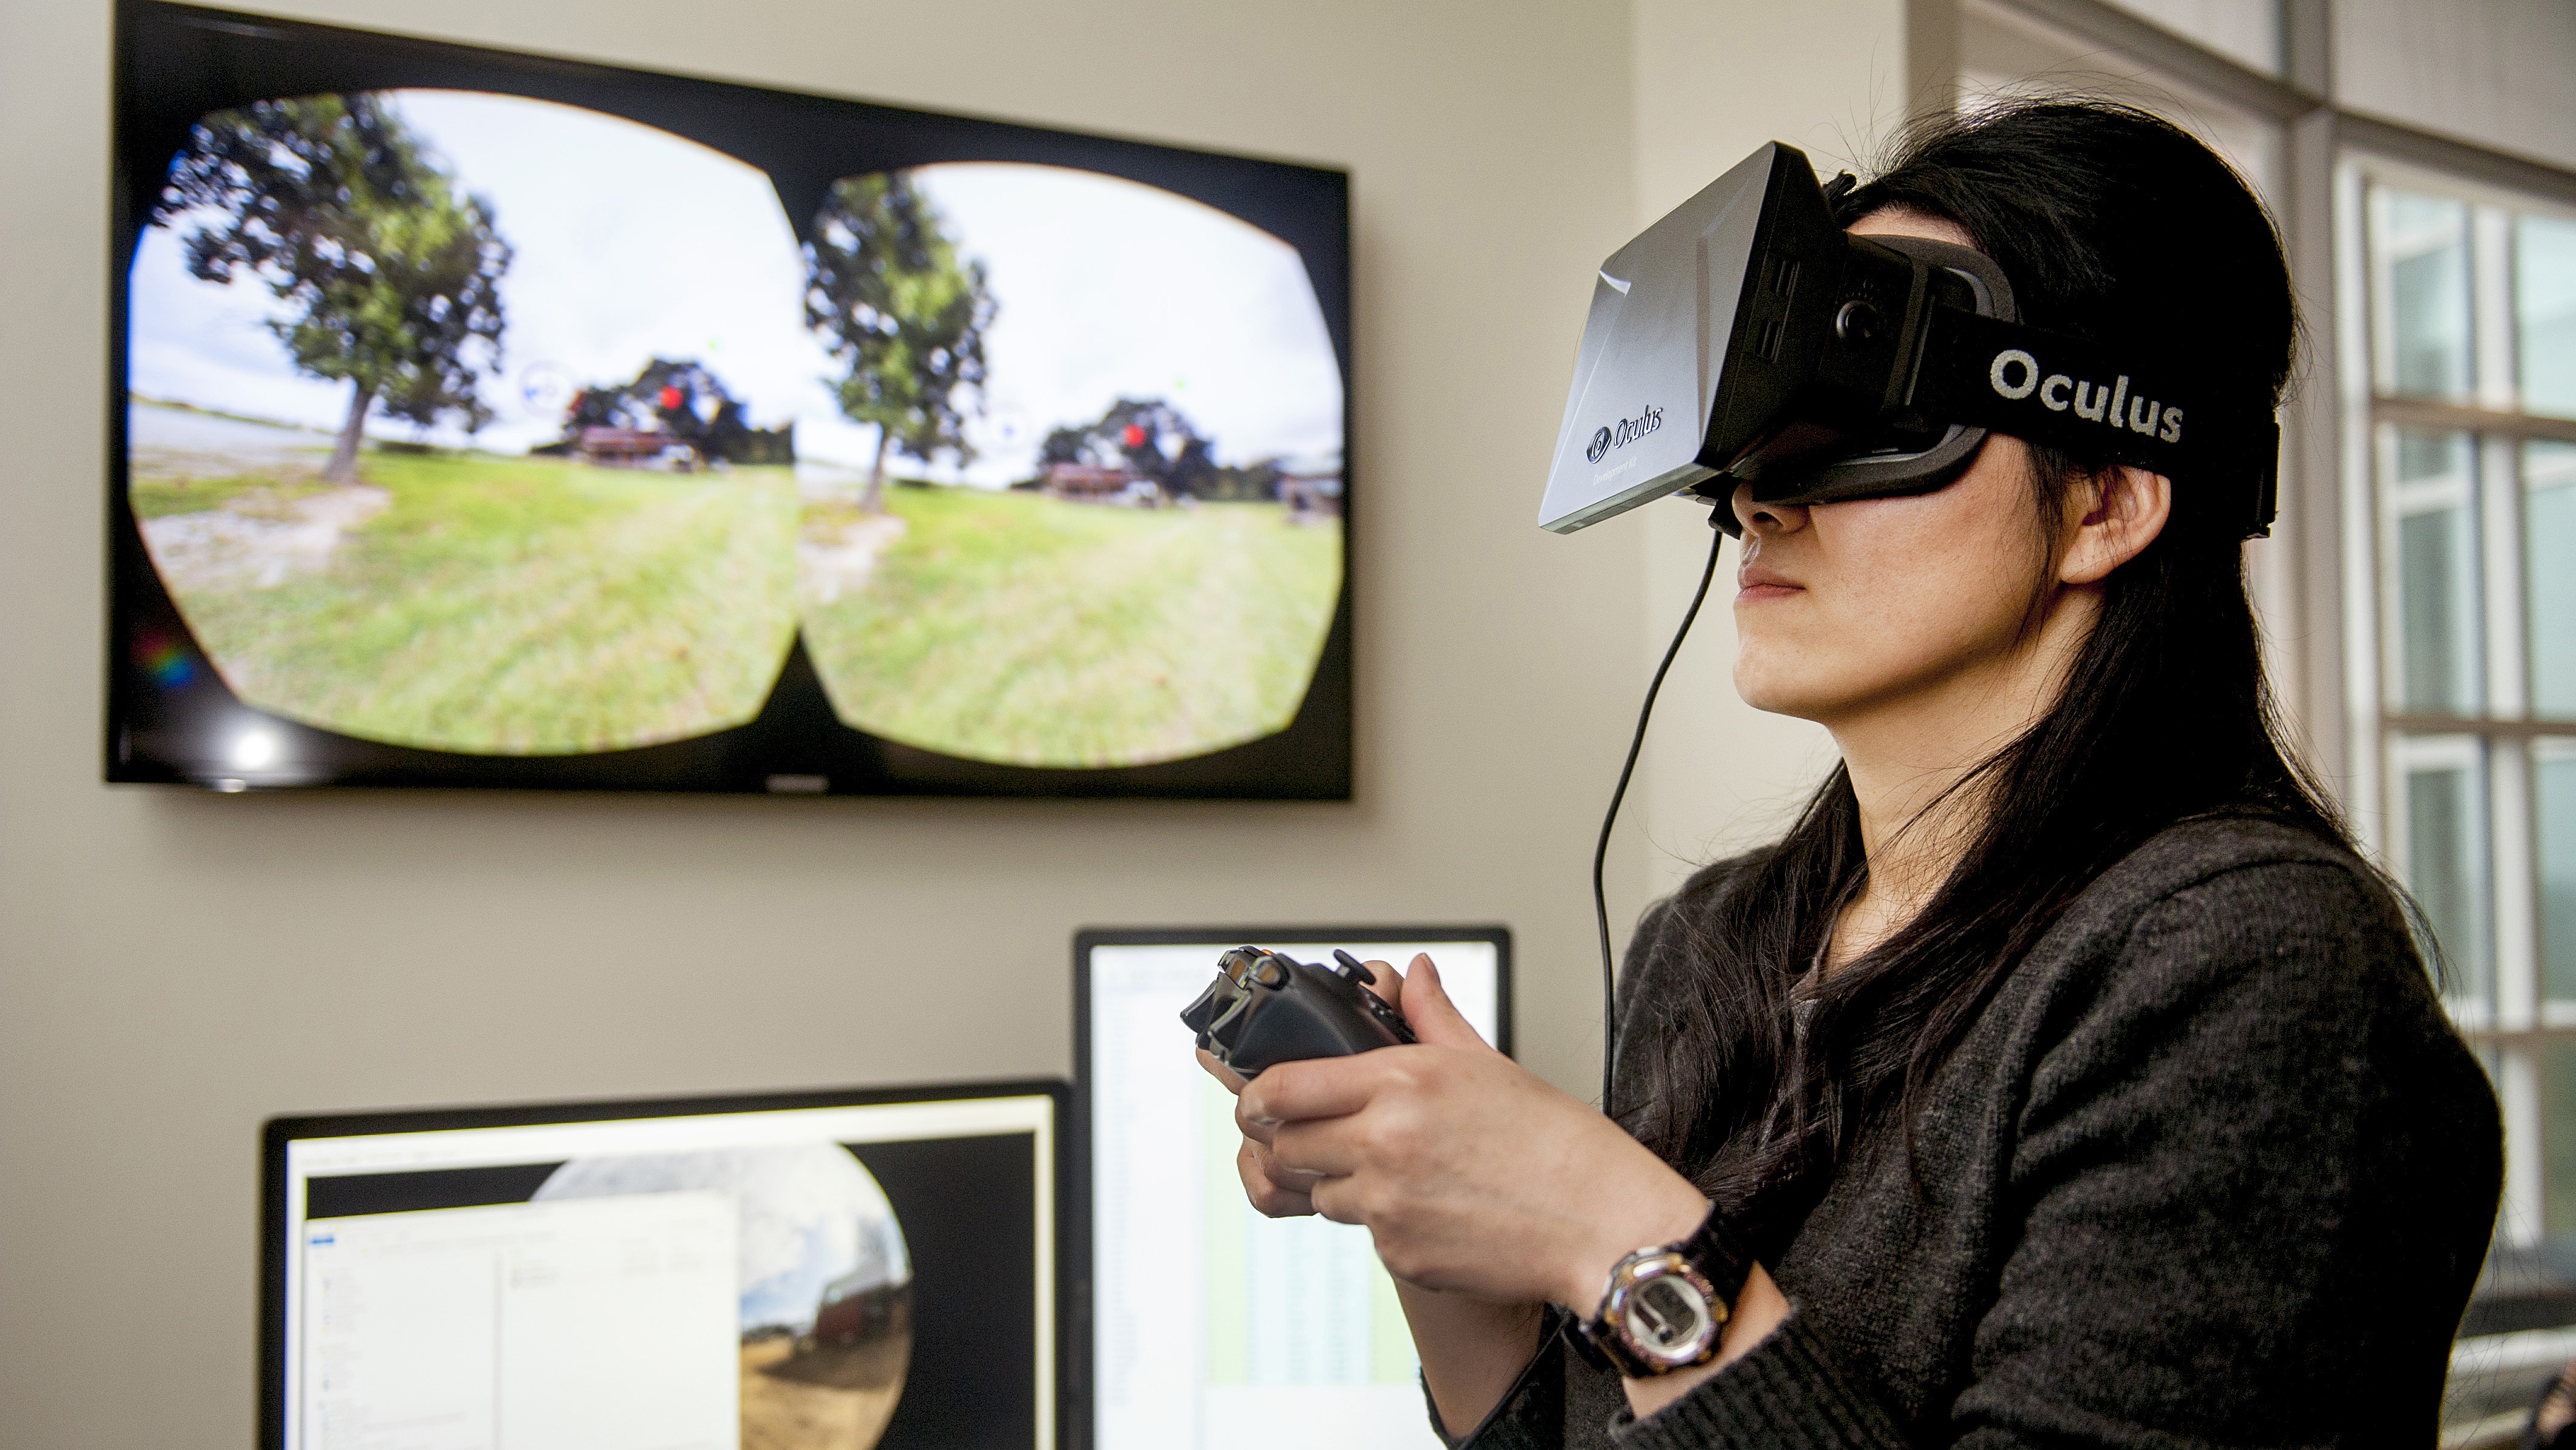 A student looks through virtual reality goggles and uses a controller